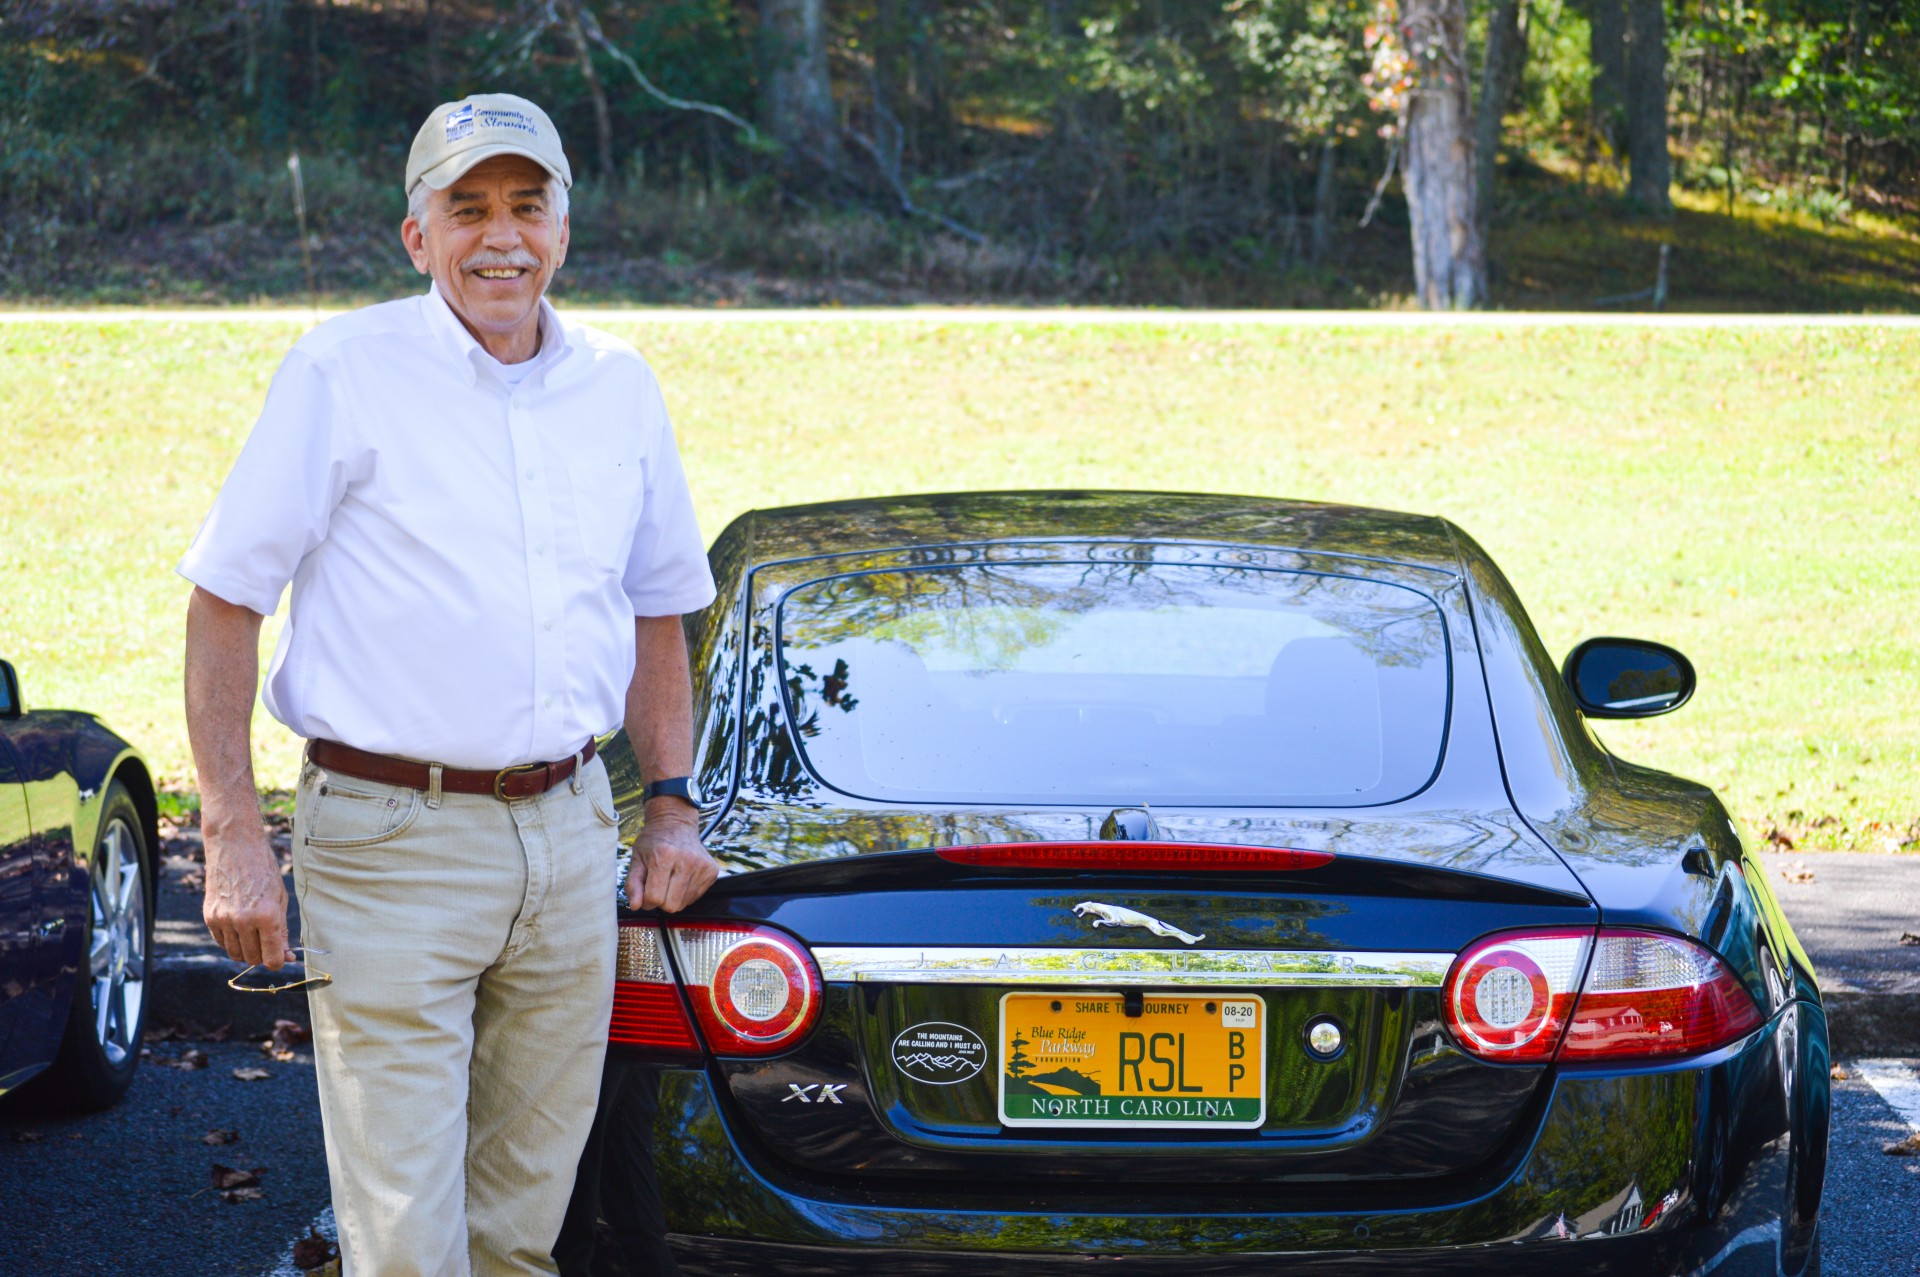 Rick Lotz with his personalized Parkway license plate.